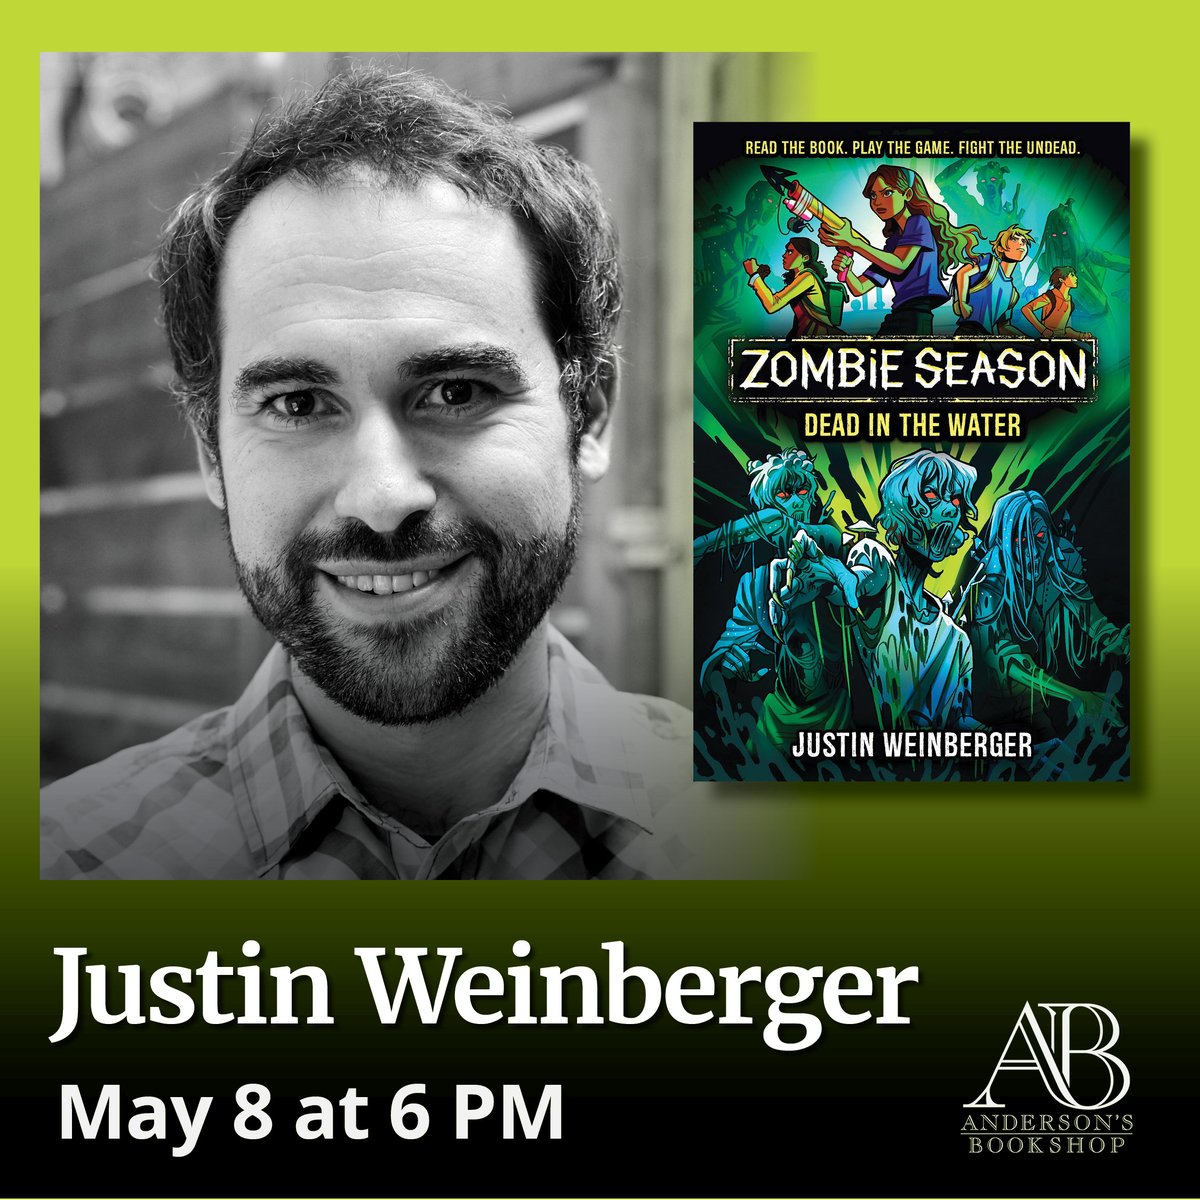 MAY 8: We can't wait to welcome Justin Weinberger Justin Weinberger @justinistired to our Downers Grove store! Meet Justin, hear him talk, take Q&A, and have a photo/signing line! TICKETS: …tinWeinbergerAndersons.eventcombo.com